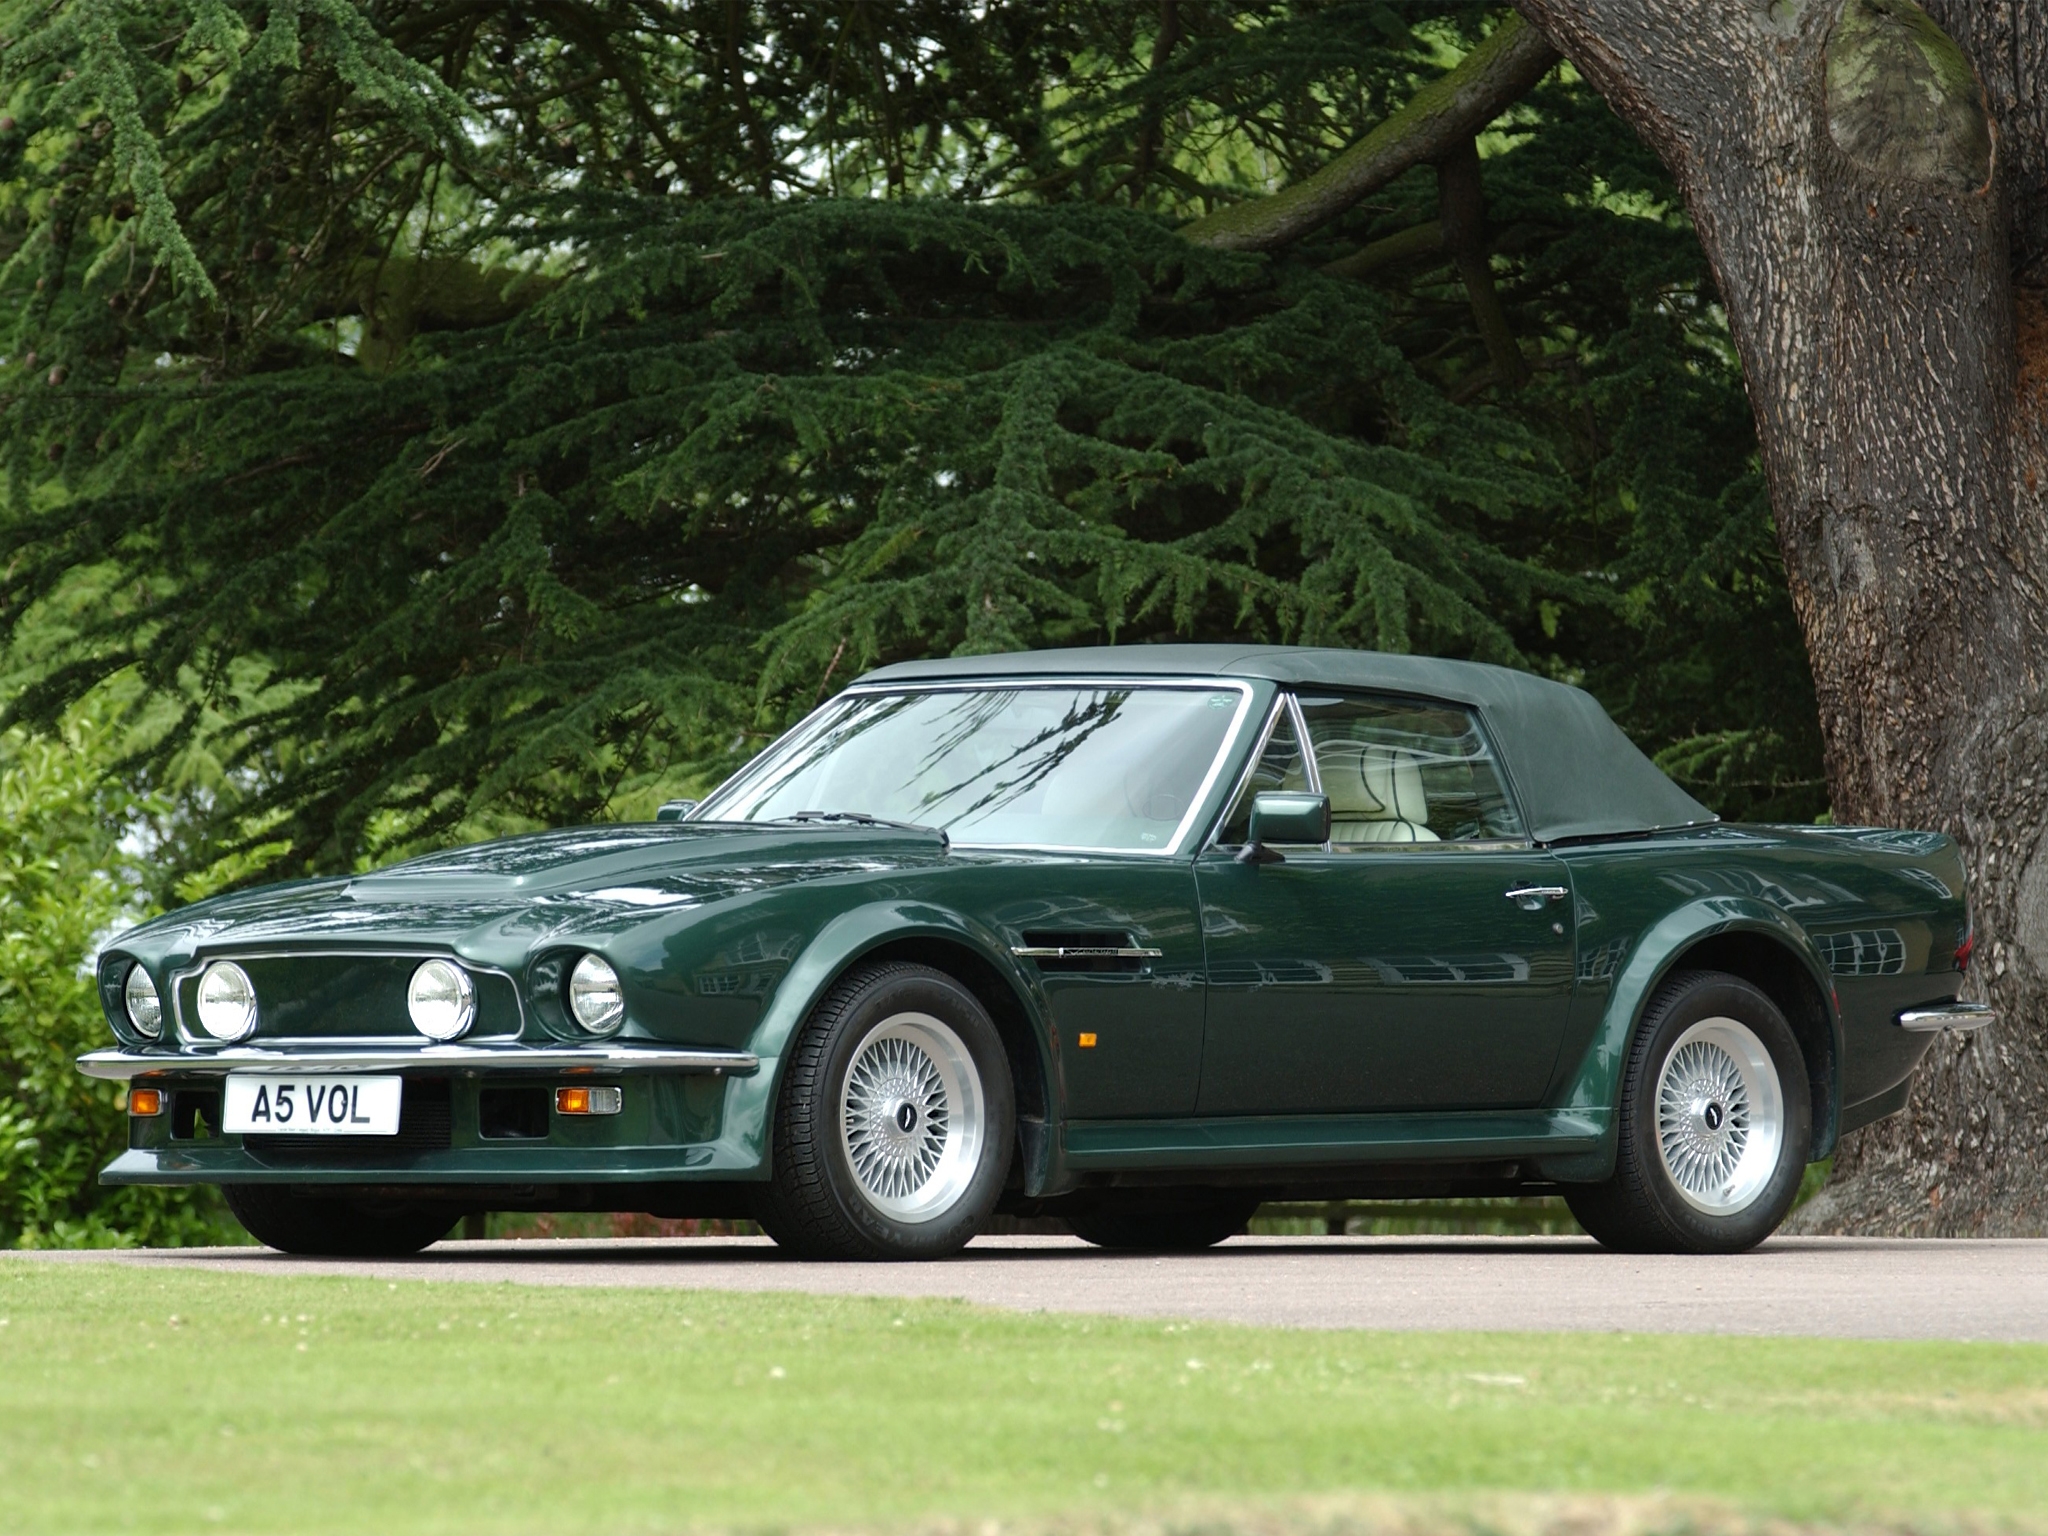 cars, side view, aston martin, v8 Retro HQ Background Images